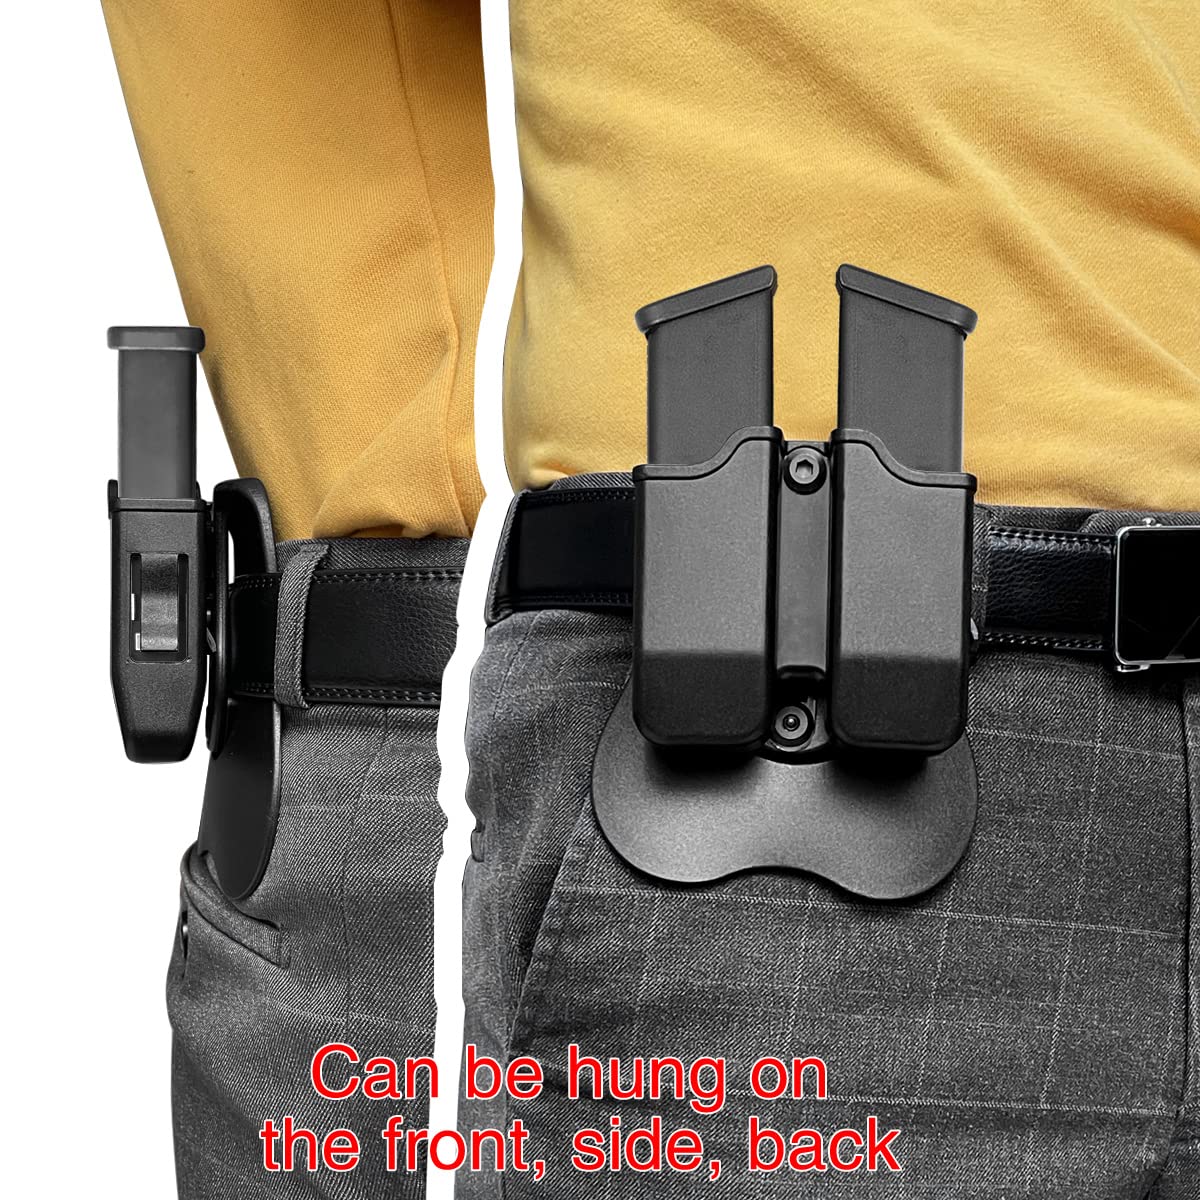 Tactical IWB OWB Gun Holster with Magazine Pouch Concealed Carry